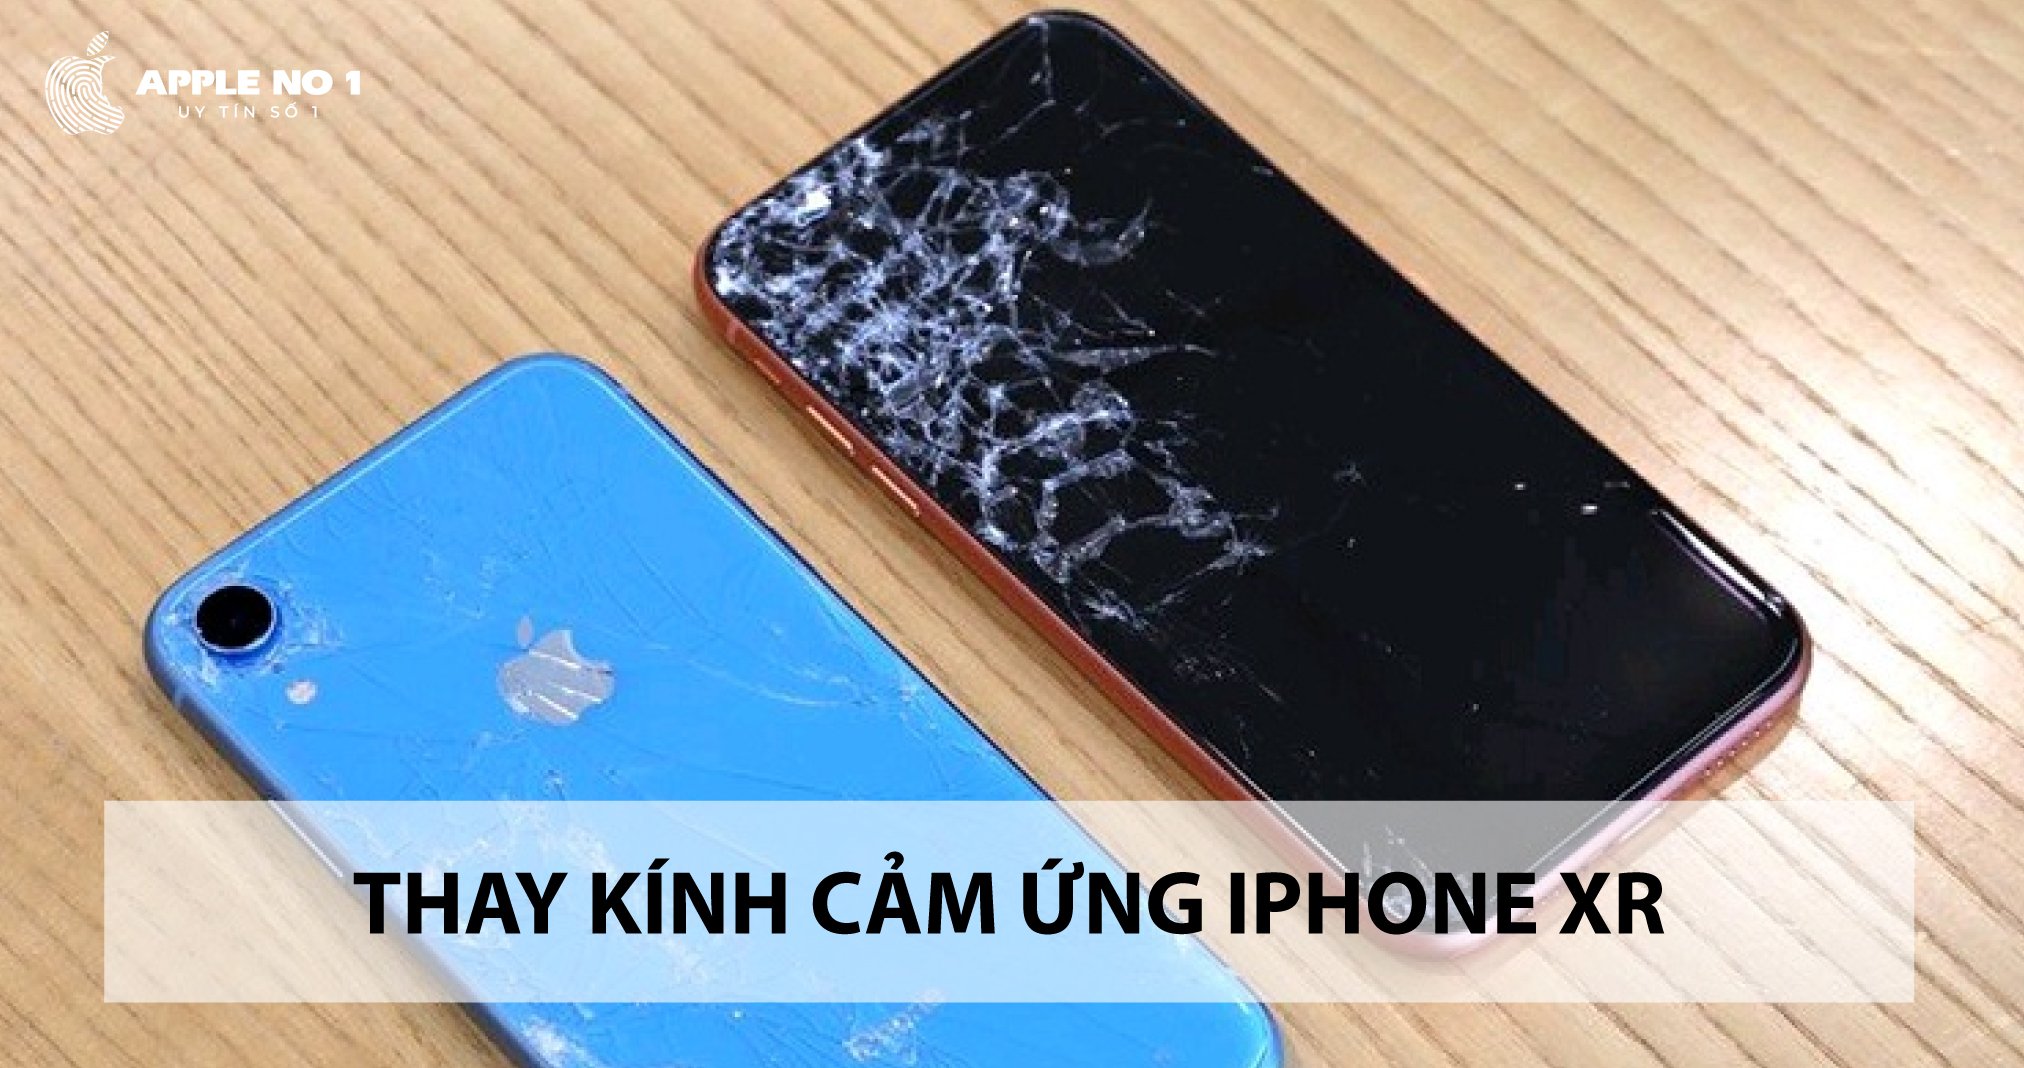 thay kinh cam ung iphone xr chinh hang Ha Noi